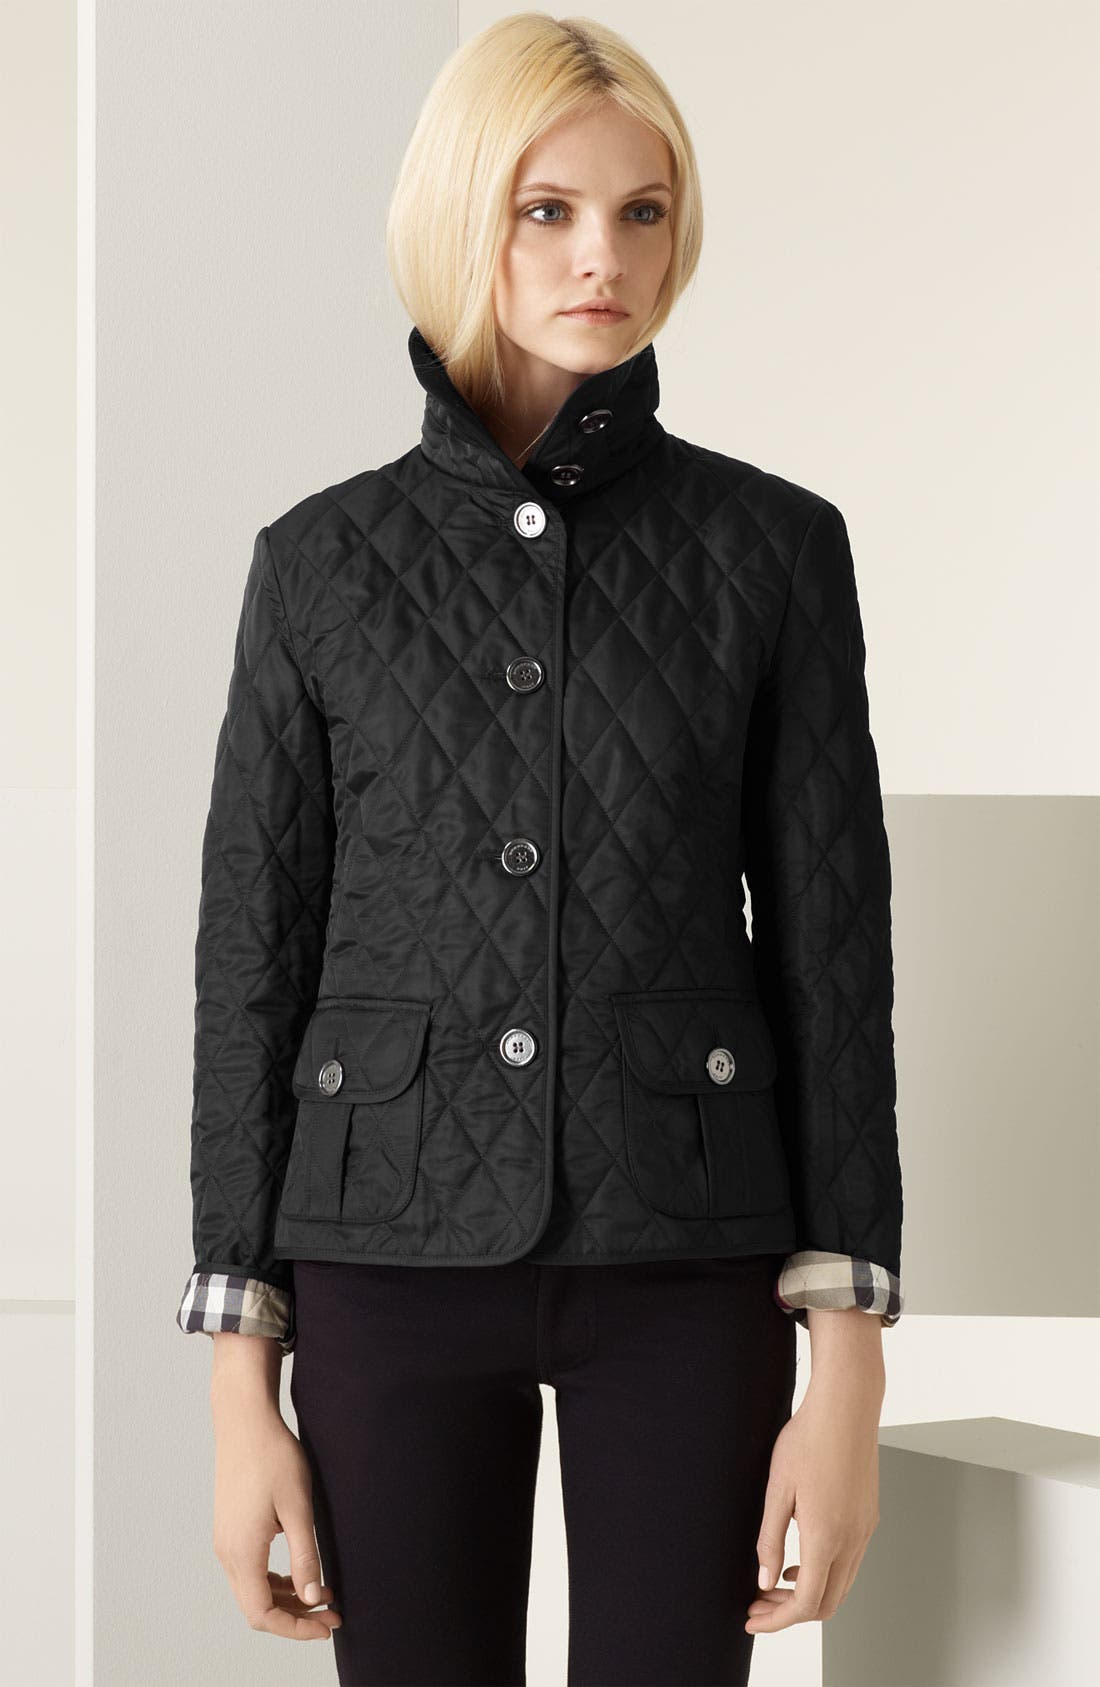 Burberry Brit Diamond Quilted Jacket 